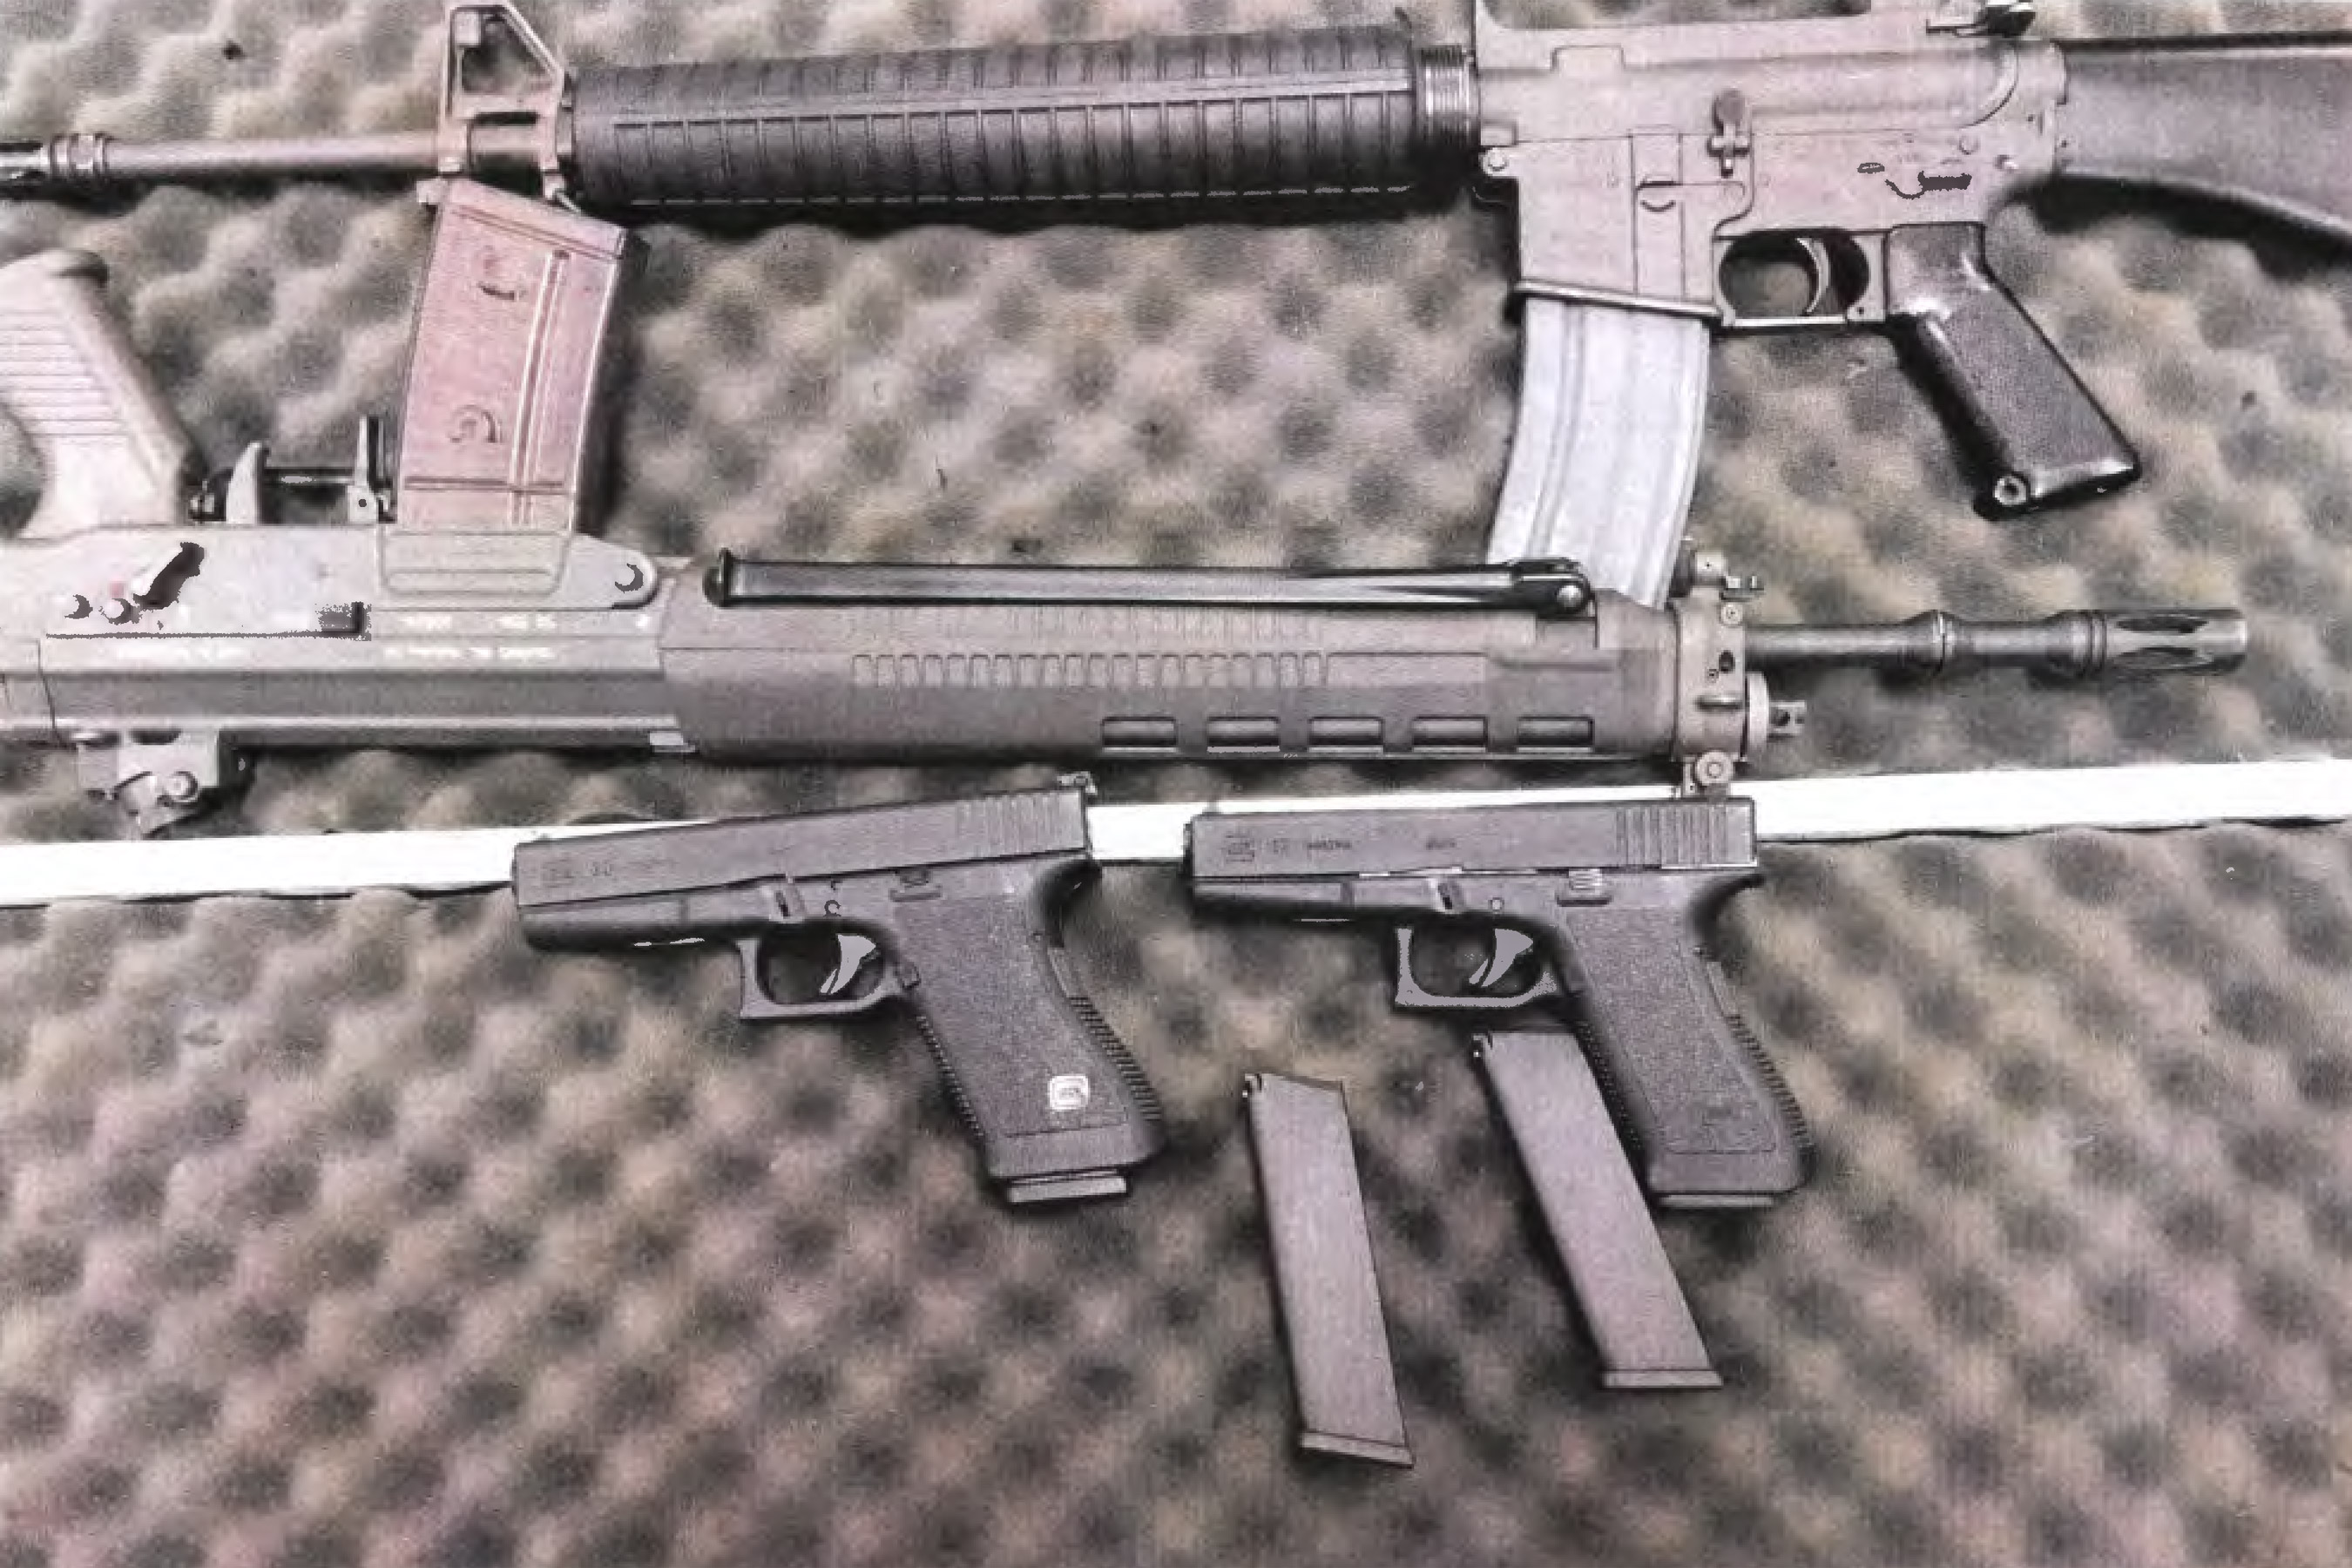 Firearms purchased by Alexander Ciccolo (Department of Justice)